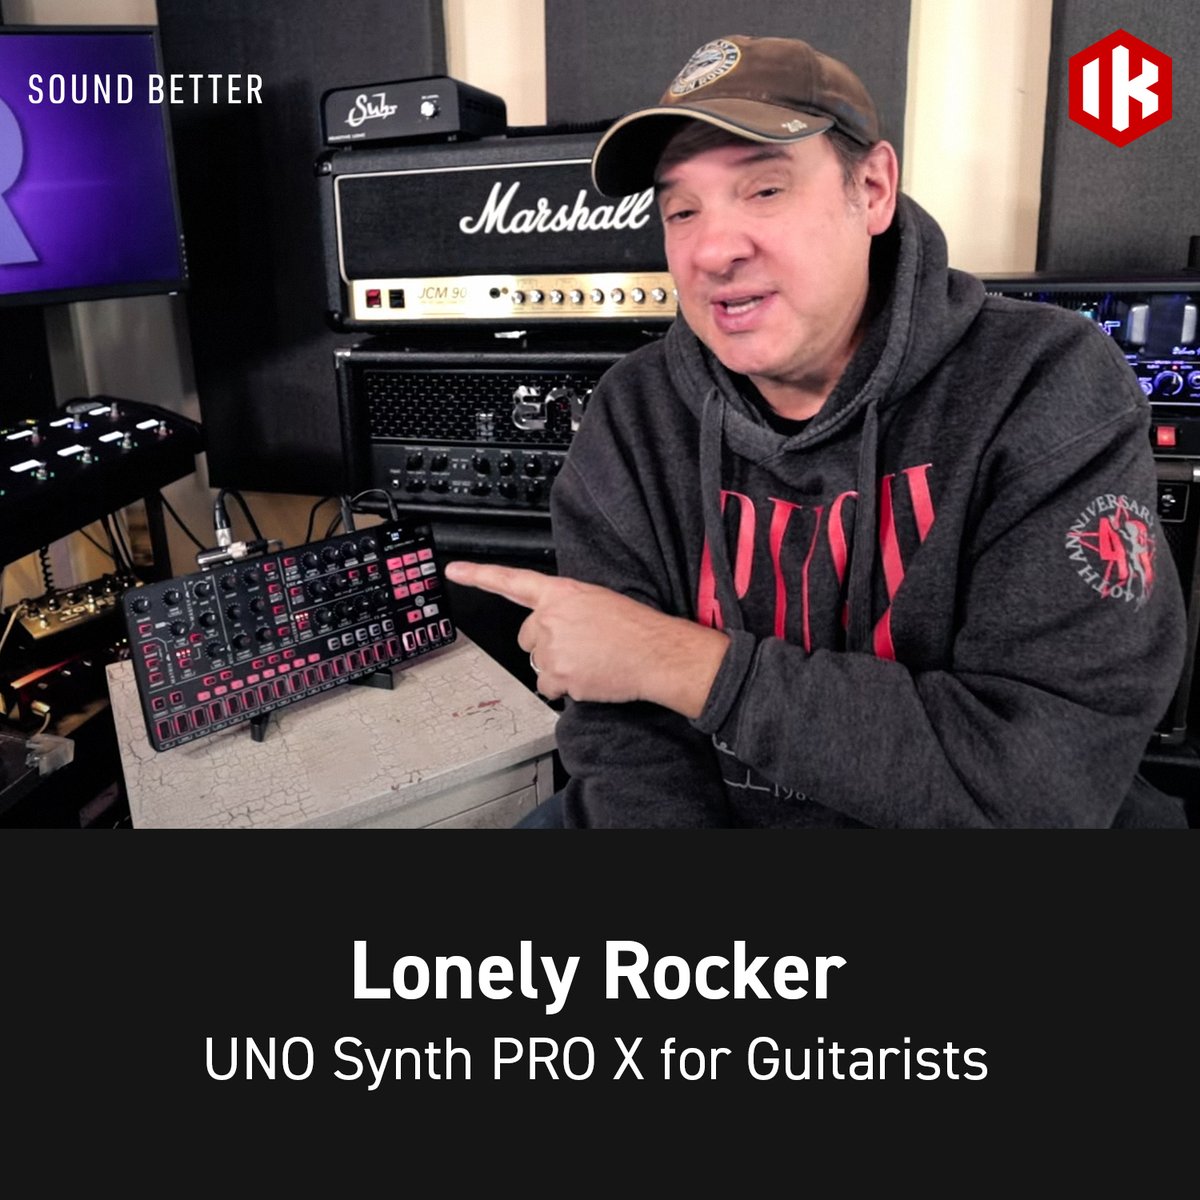 Guitar and bass players can get stuck in our routines if we don't have other musicians around to bounce ideas off. Here's how UNO Synth PRO X can inspire us in different ways as it does for @TheLonelyRocker. ➡️ bit.ly/lonelyrockerus…